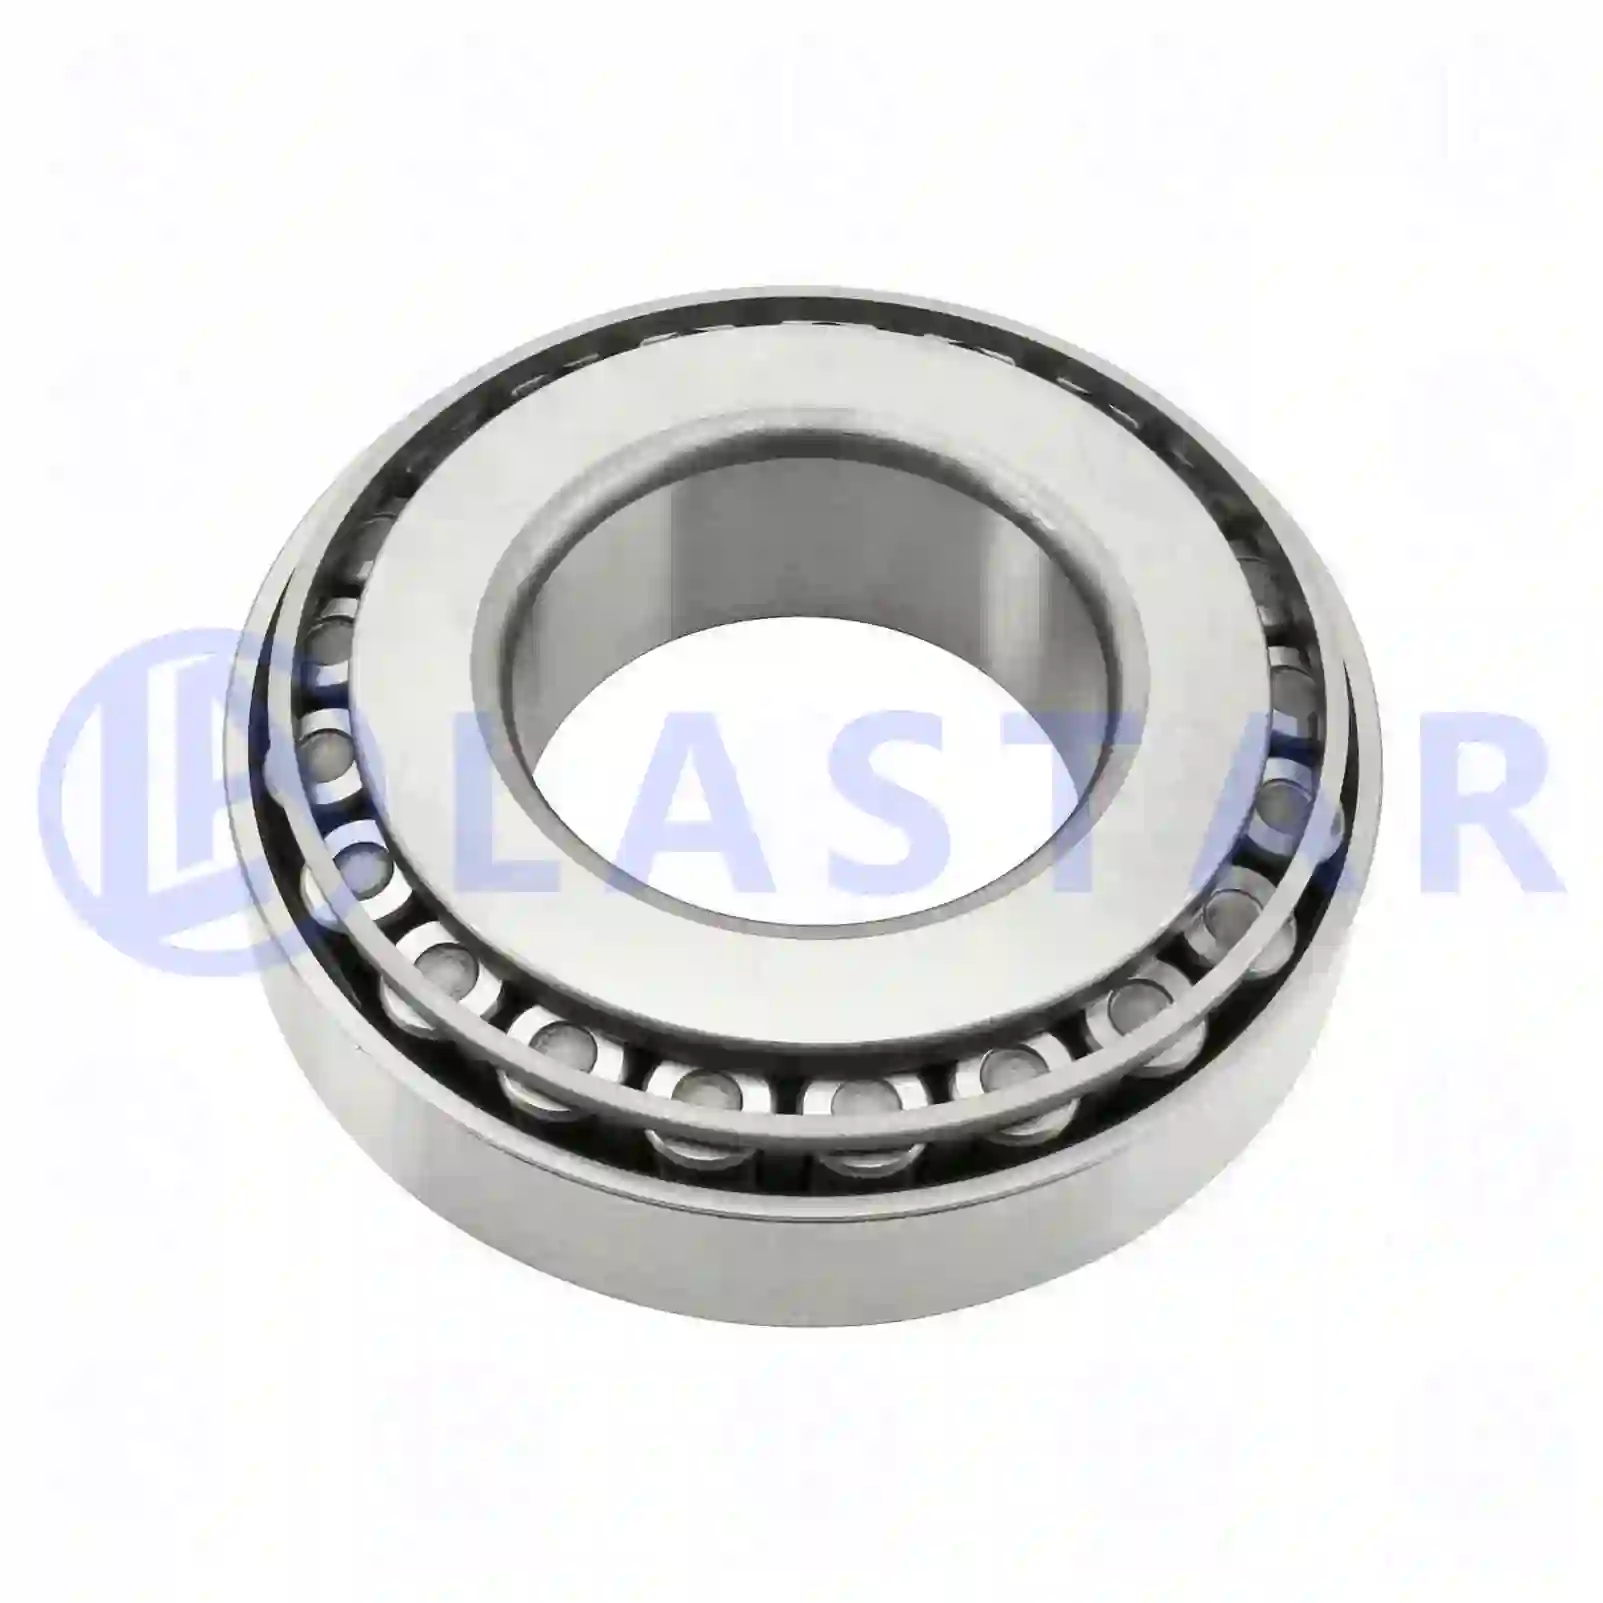 Hub Tapered roller bearing, la no: 77726737 ,  oem no:1190885, 184088, 20428192, 8151820, 815820, 88640, ZG02988-0008 Lastar Spare Part | Truck Spare Parts, Auotomotive Spare Parts